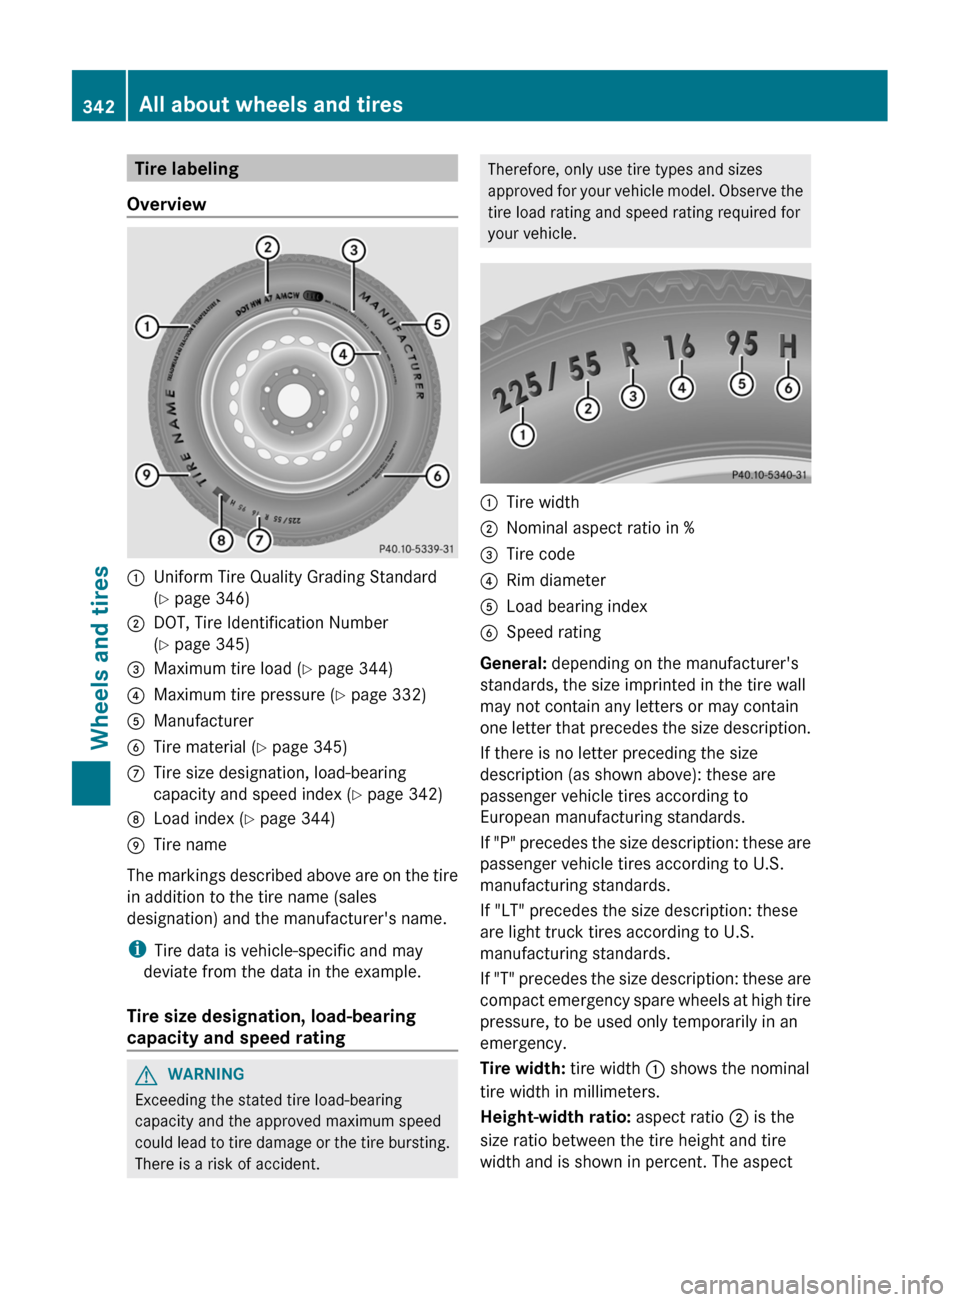 MERCEDES-BENZ CLS-Class 2013 W218 Owners Manual Tire labeling
Overview :
Uniform Tire Quality Grading Standard
(Y page 346)
; DOT, Tire Identification Number
(Y page 345)
= Maximum tire load ( Y page 344)
? Maximum tire pressure (Y page 332)
A Manu